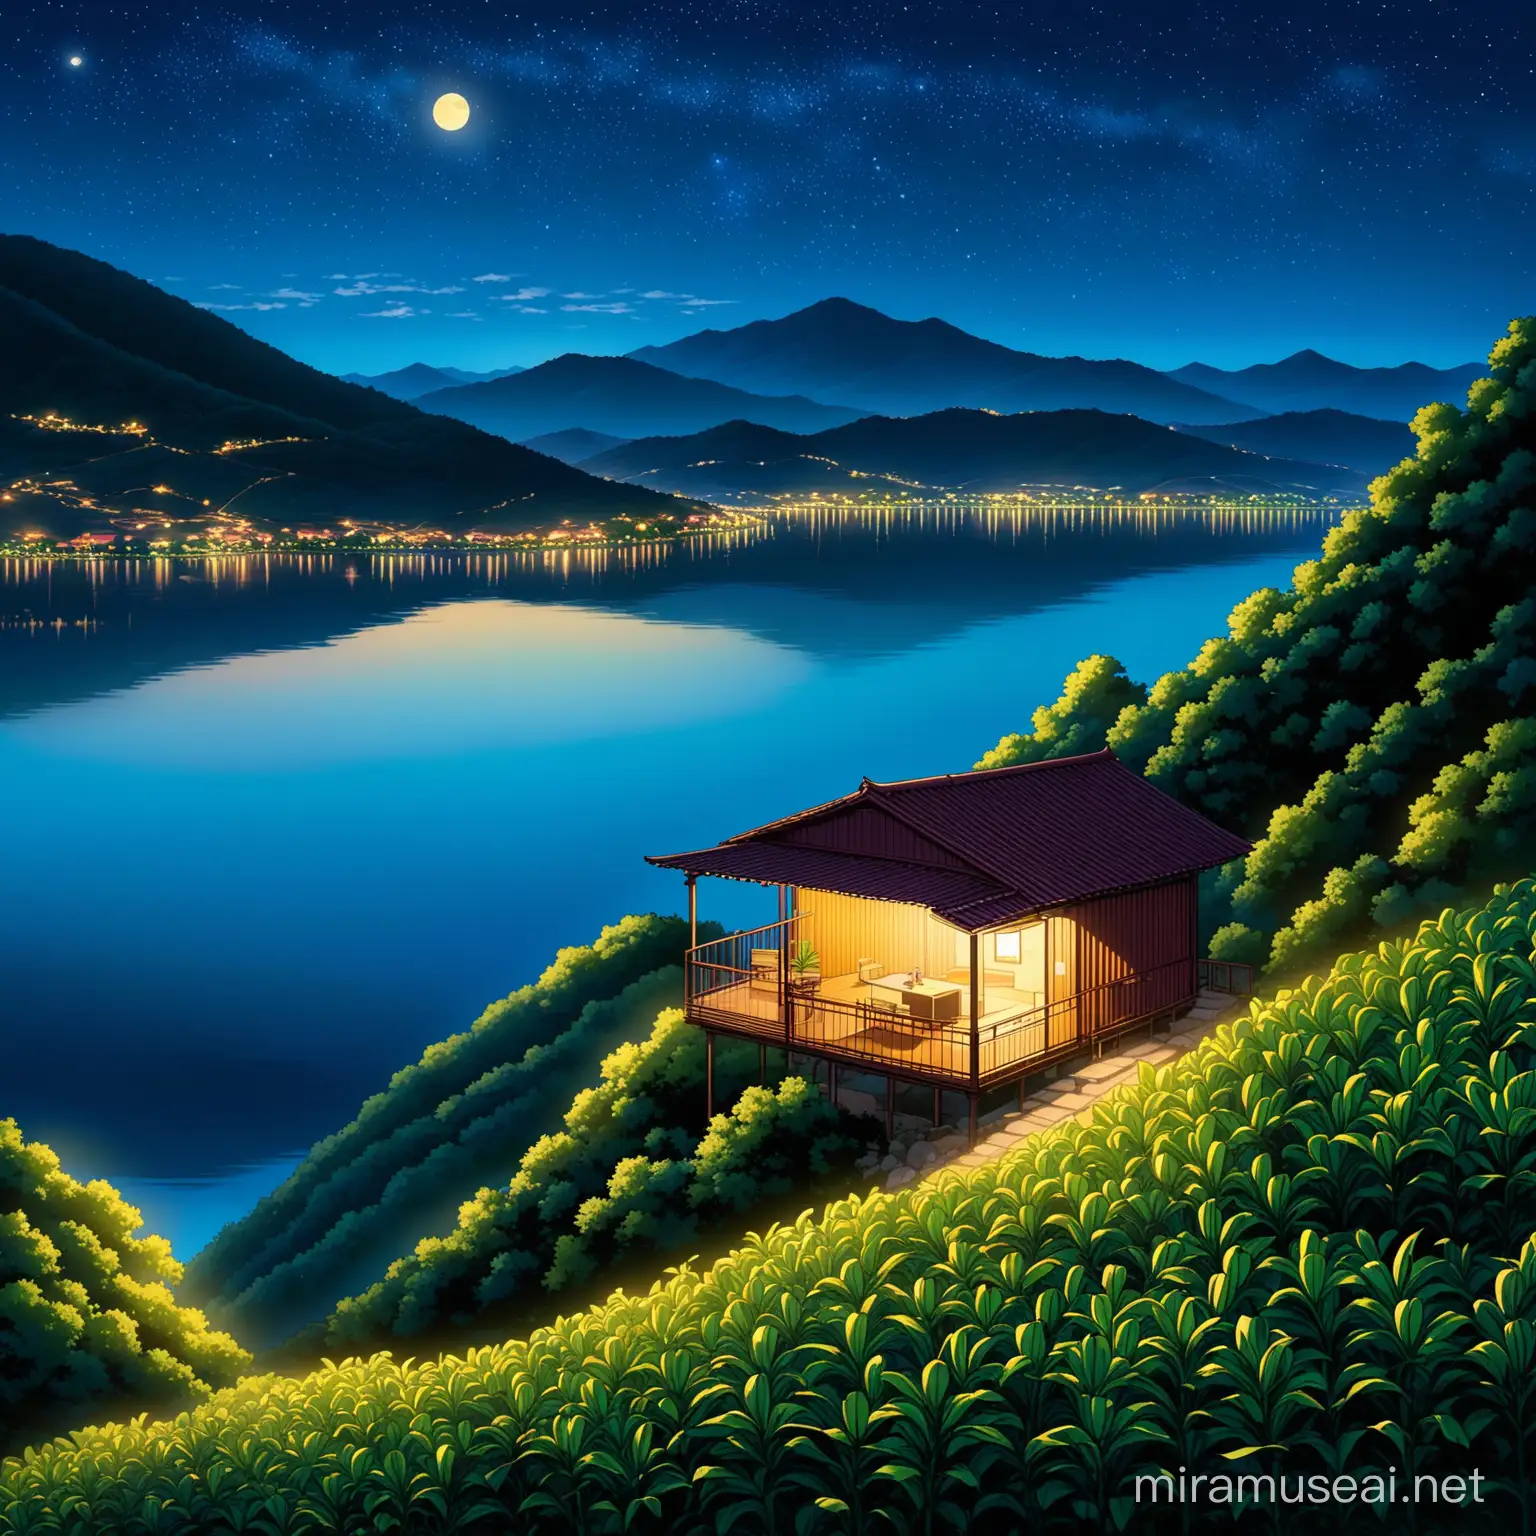 
There are lake, mountain, hill, night view, plum, apple, banana tree, black sea 
house  There is also a closed container with a hair of a woman in her 30's so that it cannot be seen.